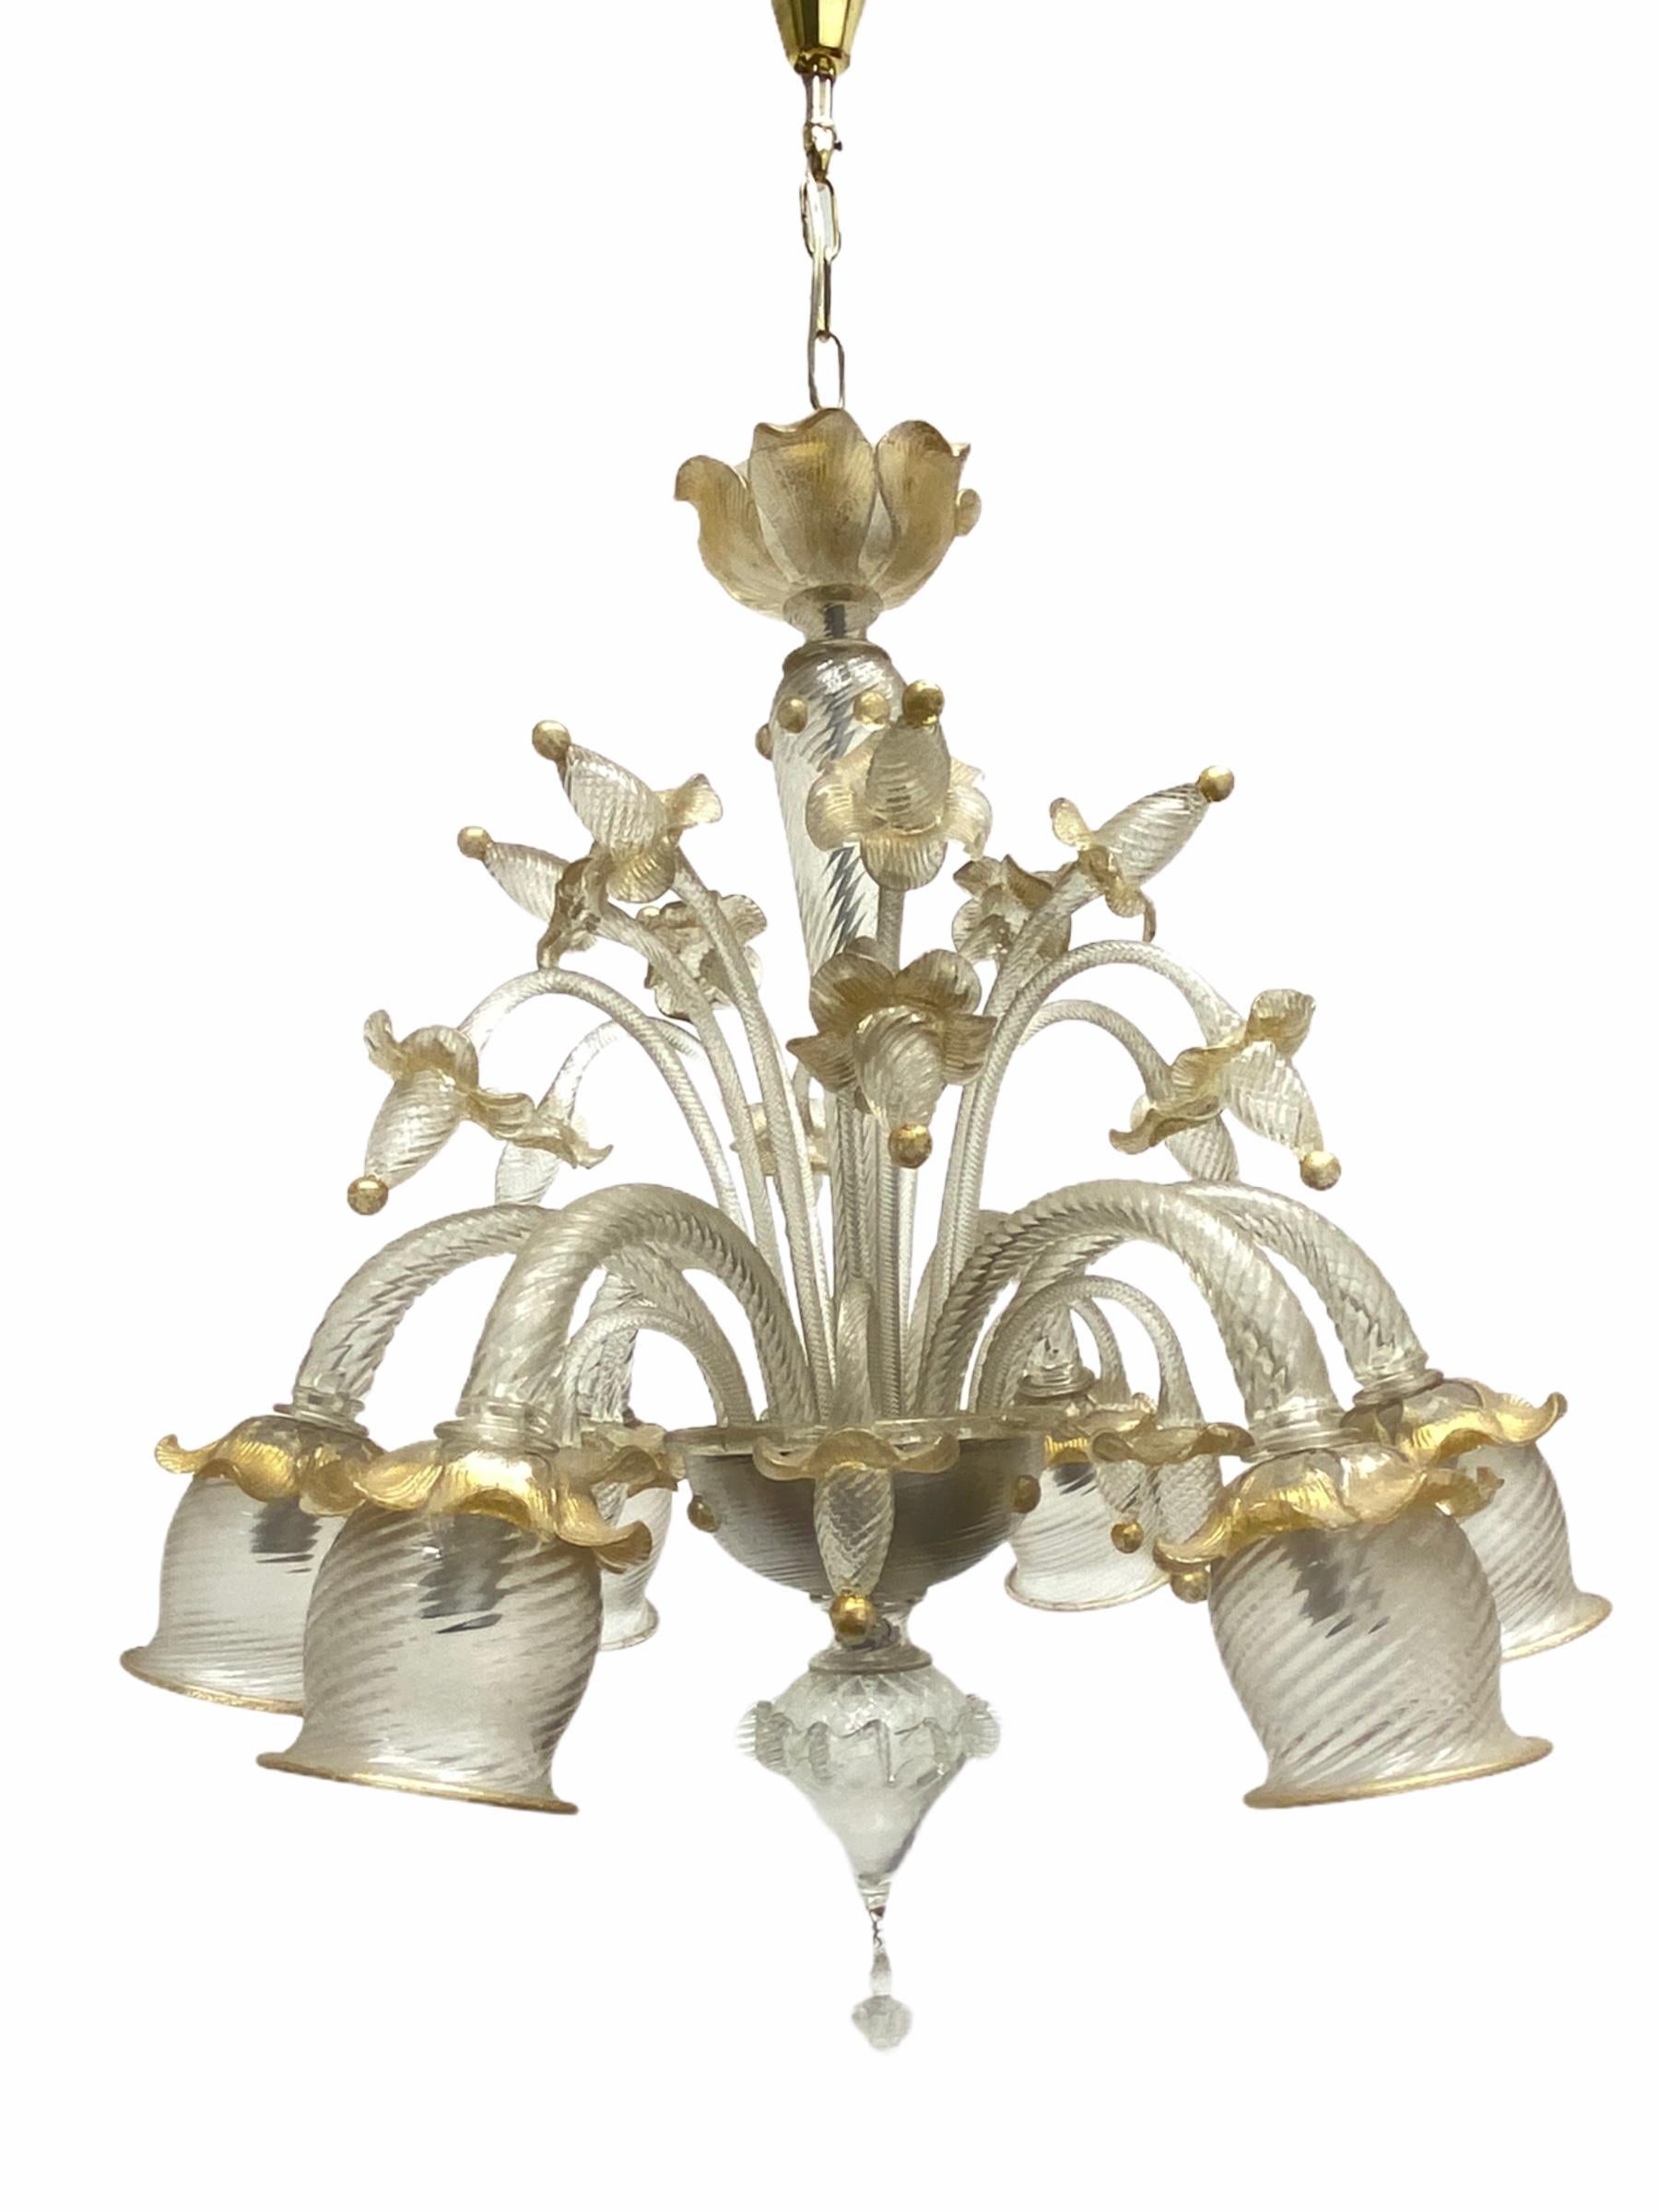 Stunning exceptional large Murano glass chandelier. Made by Barovier Toso in Murano, Italy, circa 1960s. The Chandelier requires six European E14 candelabra bulbs, each up to 40 watts. It is a real treasure and gives any room a beautiful ambience.